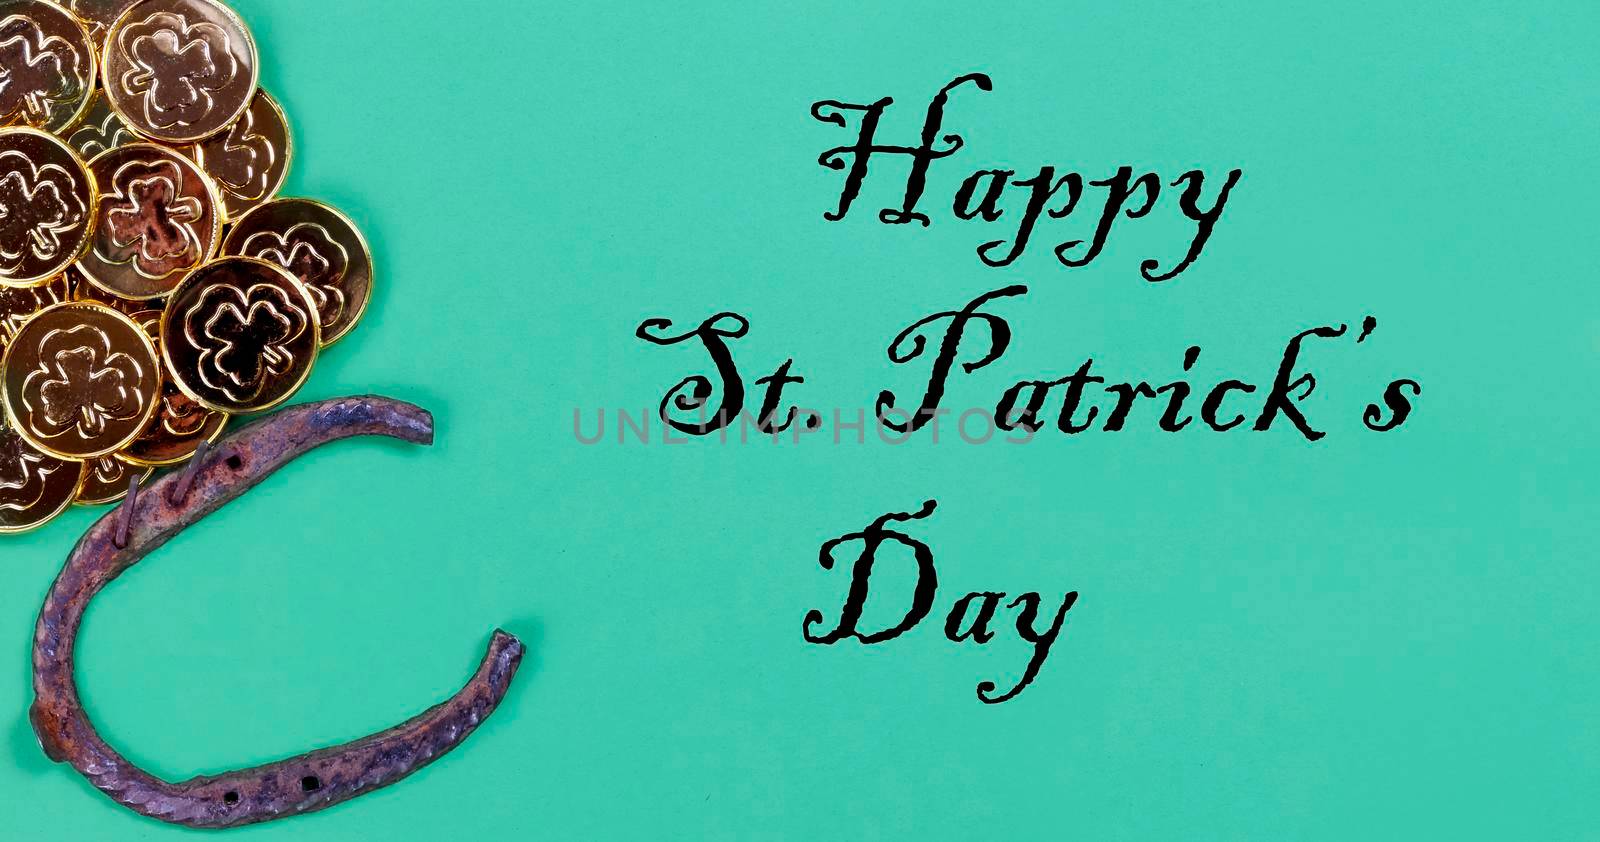 St Patricks day Irish good luck items with golden coins and horseshoe on a green paper background plus text by tab1962